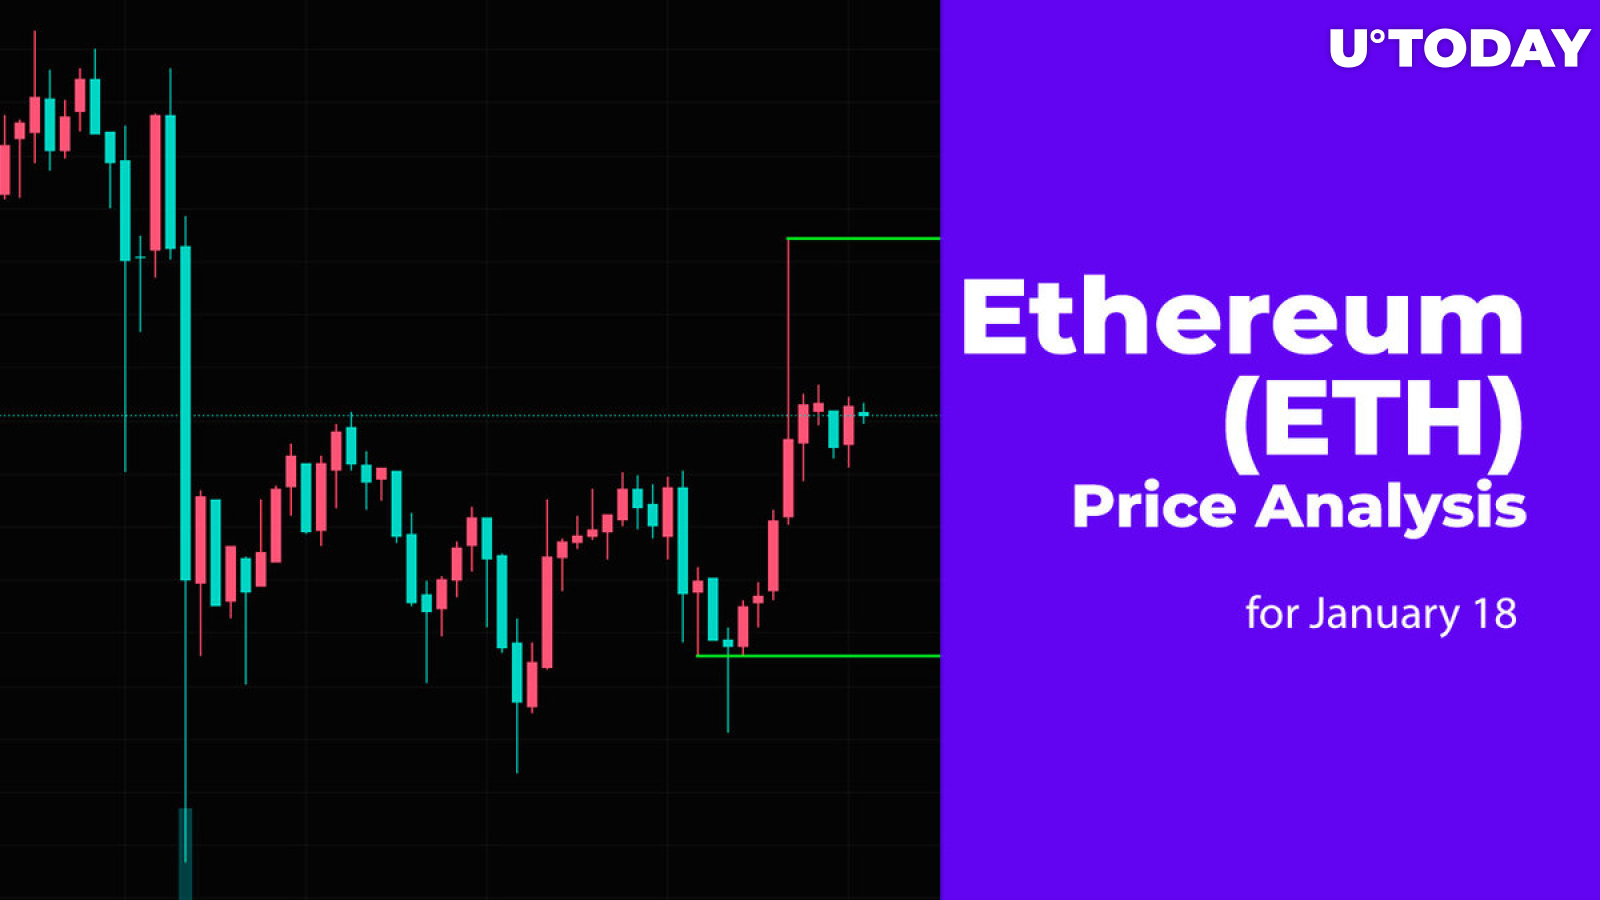 Ethereum (ETH) Price Analysis for January 18